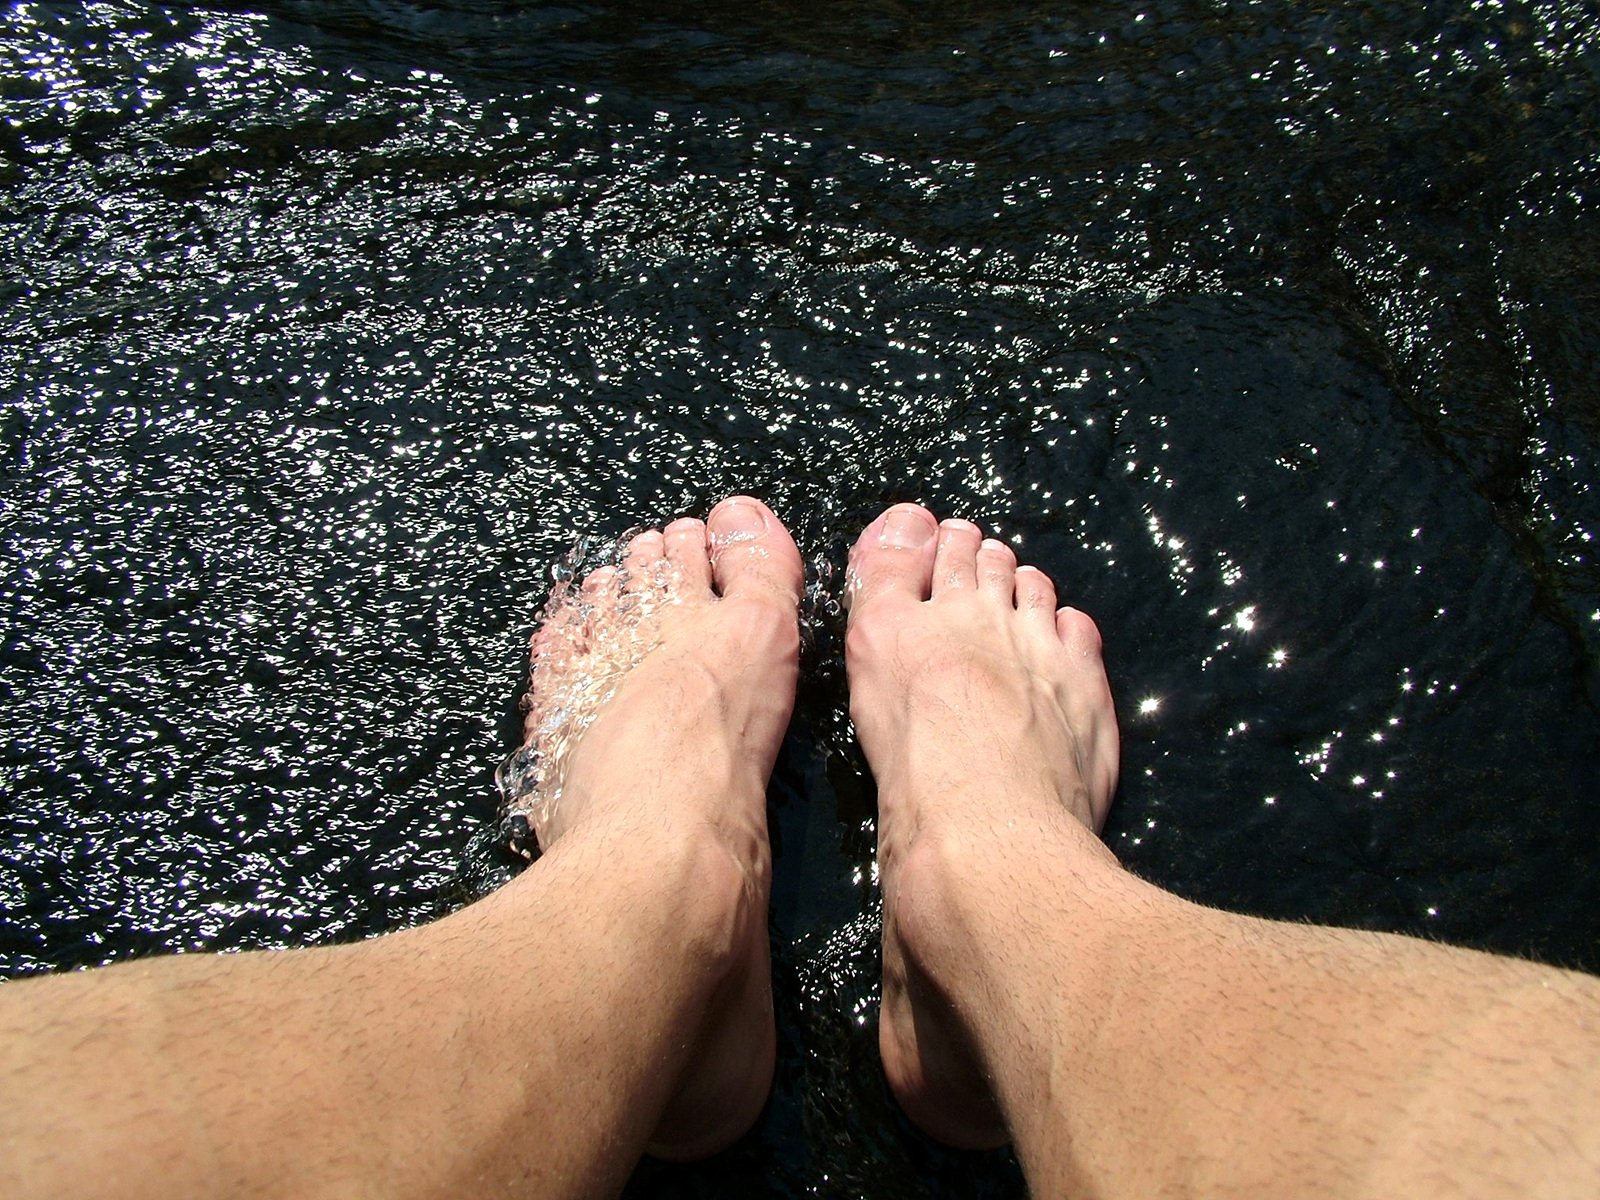 a close up view of two people standing in shallow water